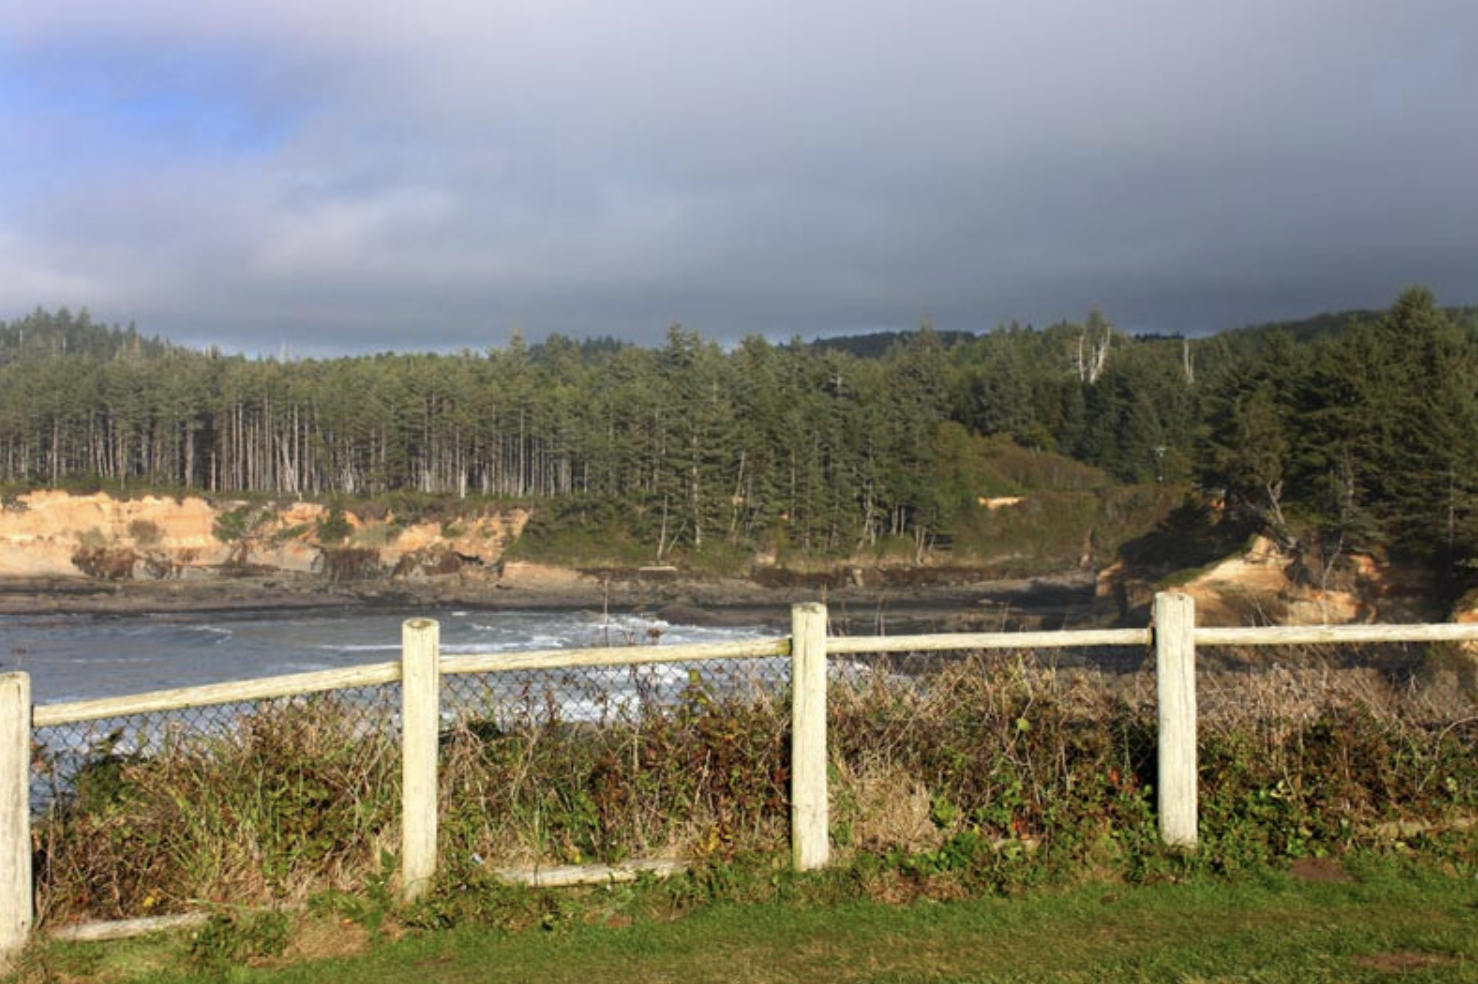 Discover Accessible Restaurants, Hotel, and Activities in Depoe Bay, Oregon